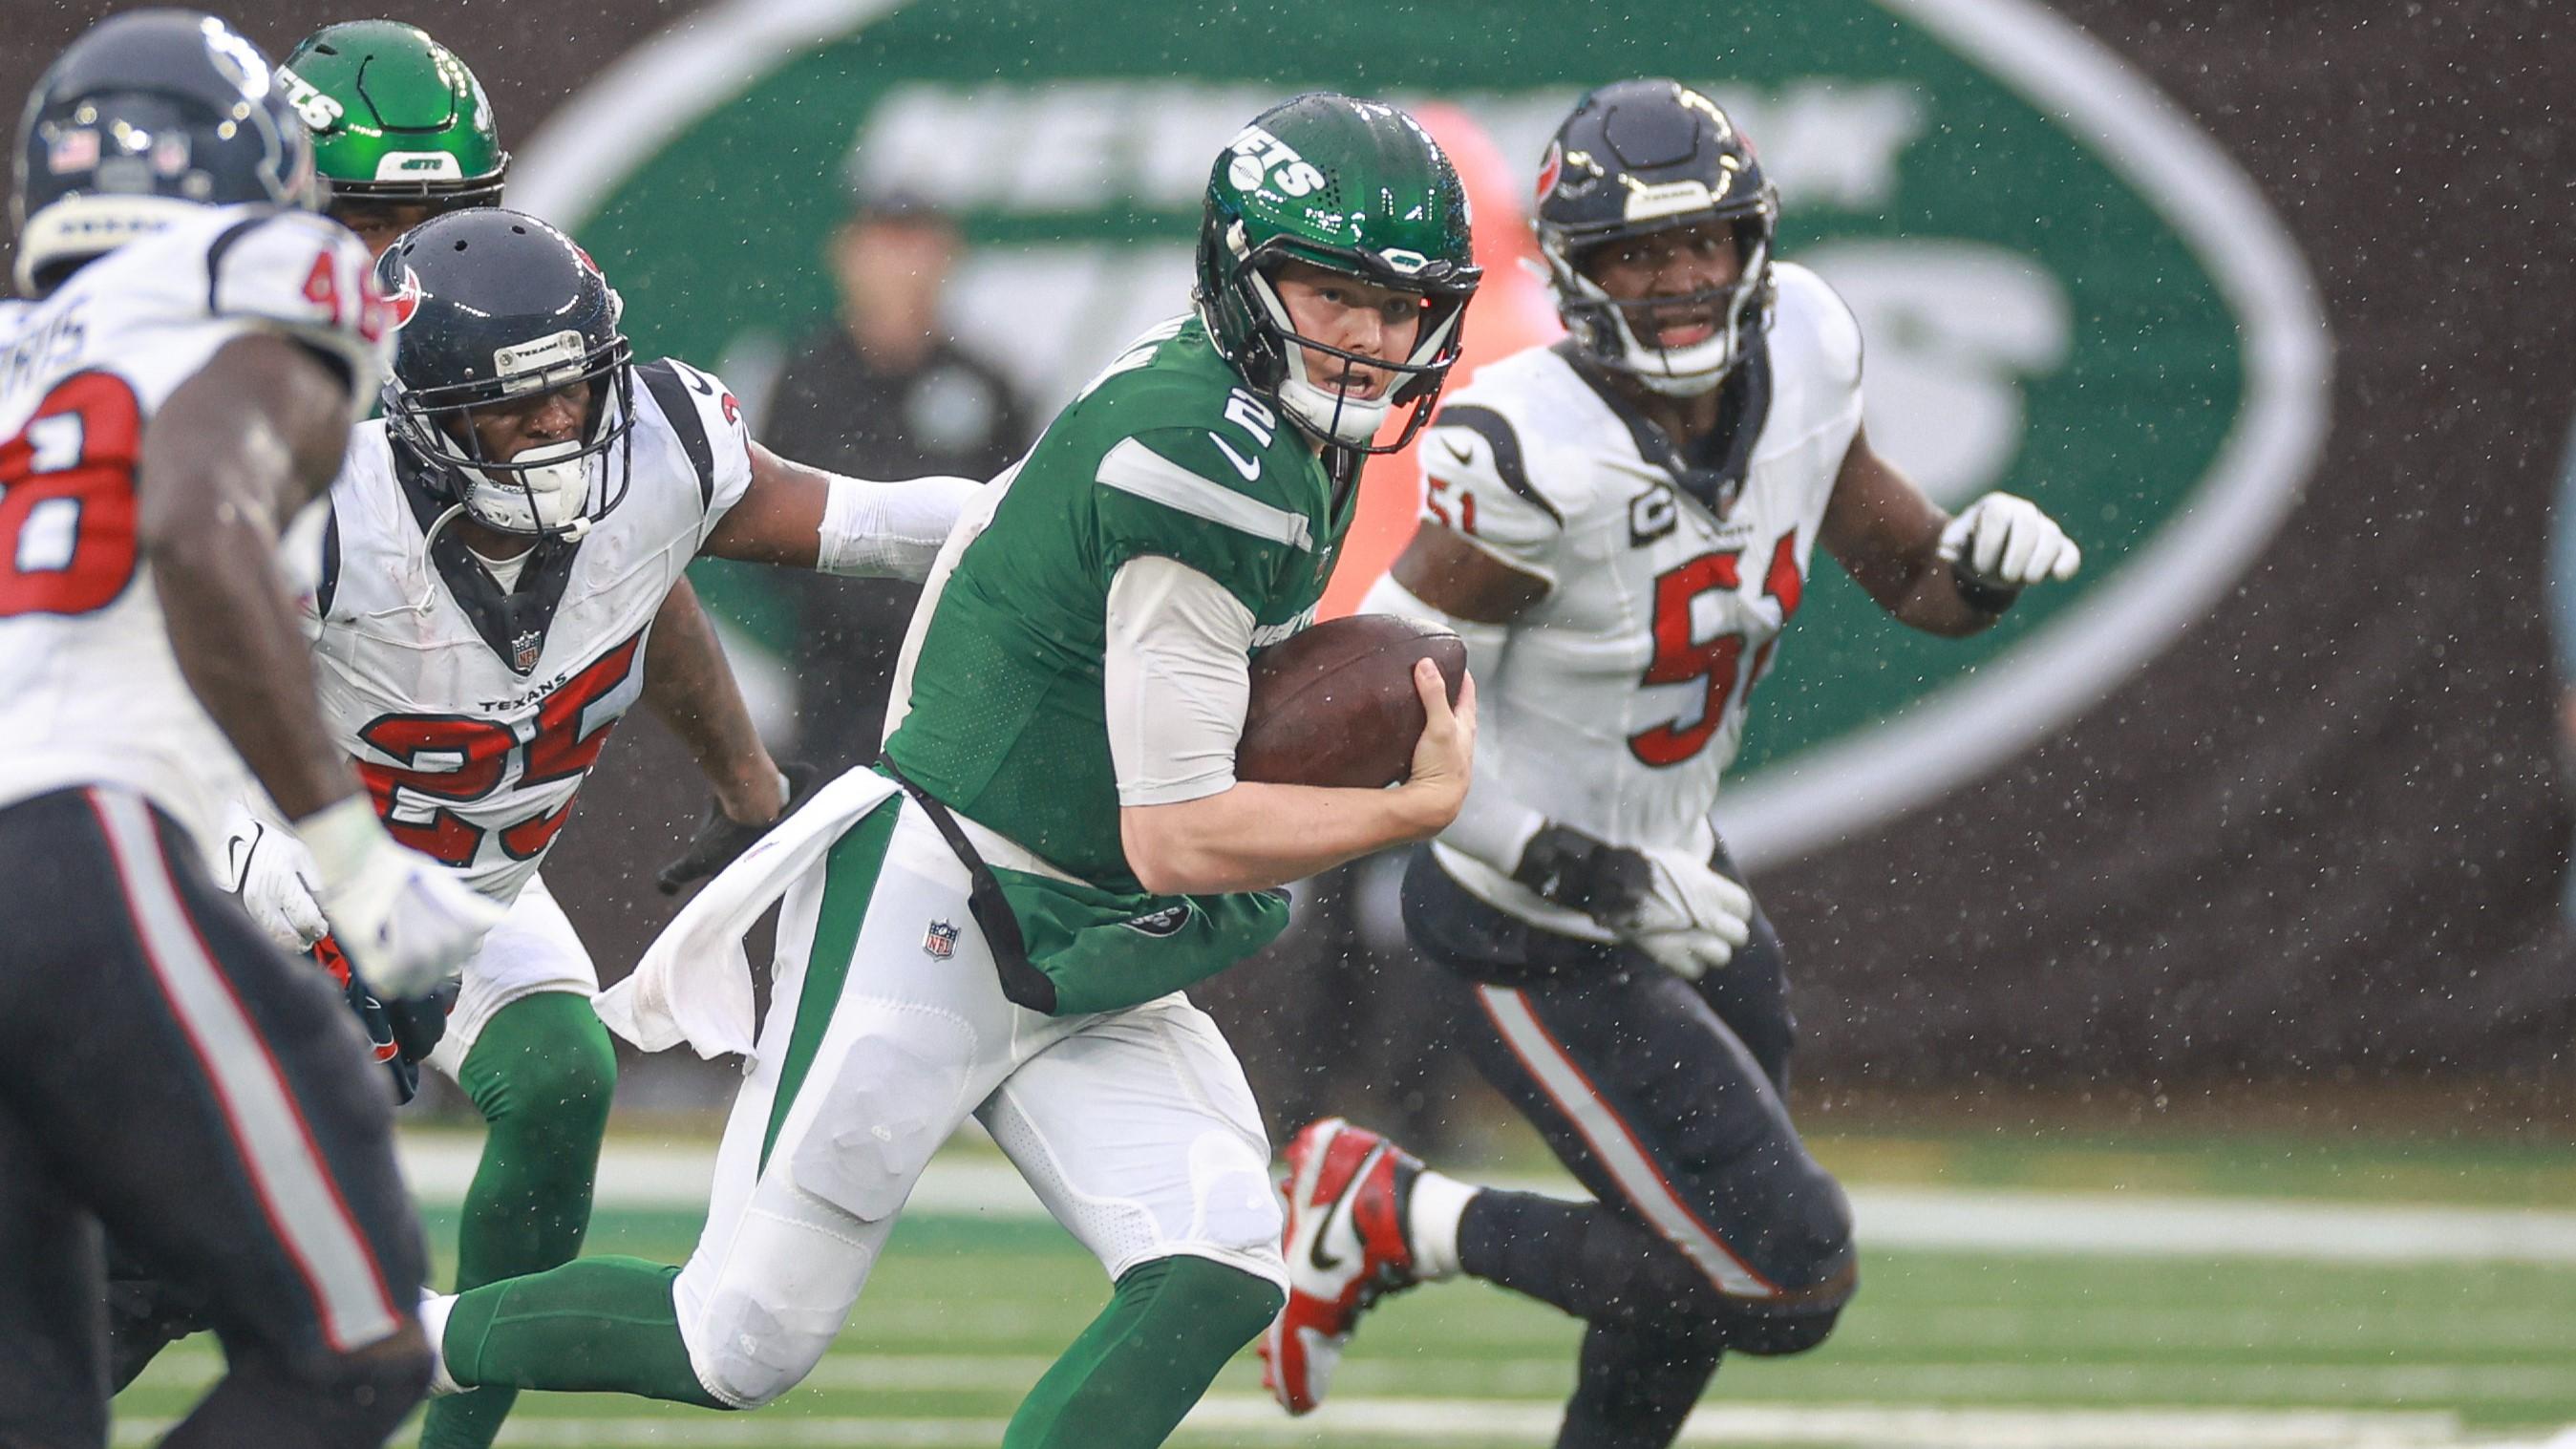 Dec 10, 2023; East Rutherford, New Jersey, USA; New York Jets quarterback Zach Wilson (2) is pursued by Houston Texans cornerback Desmond King II (25) during the second half at MetLife Stadium. Mandatory Credit: Vincent Carchietta-USA TODAY Sports / © Vincent Carchietta-USA TODAY Sports